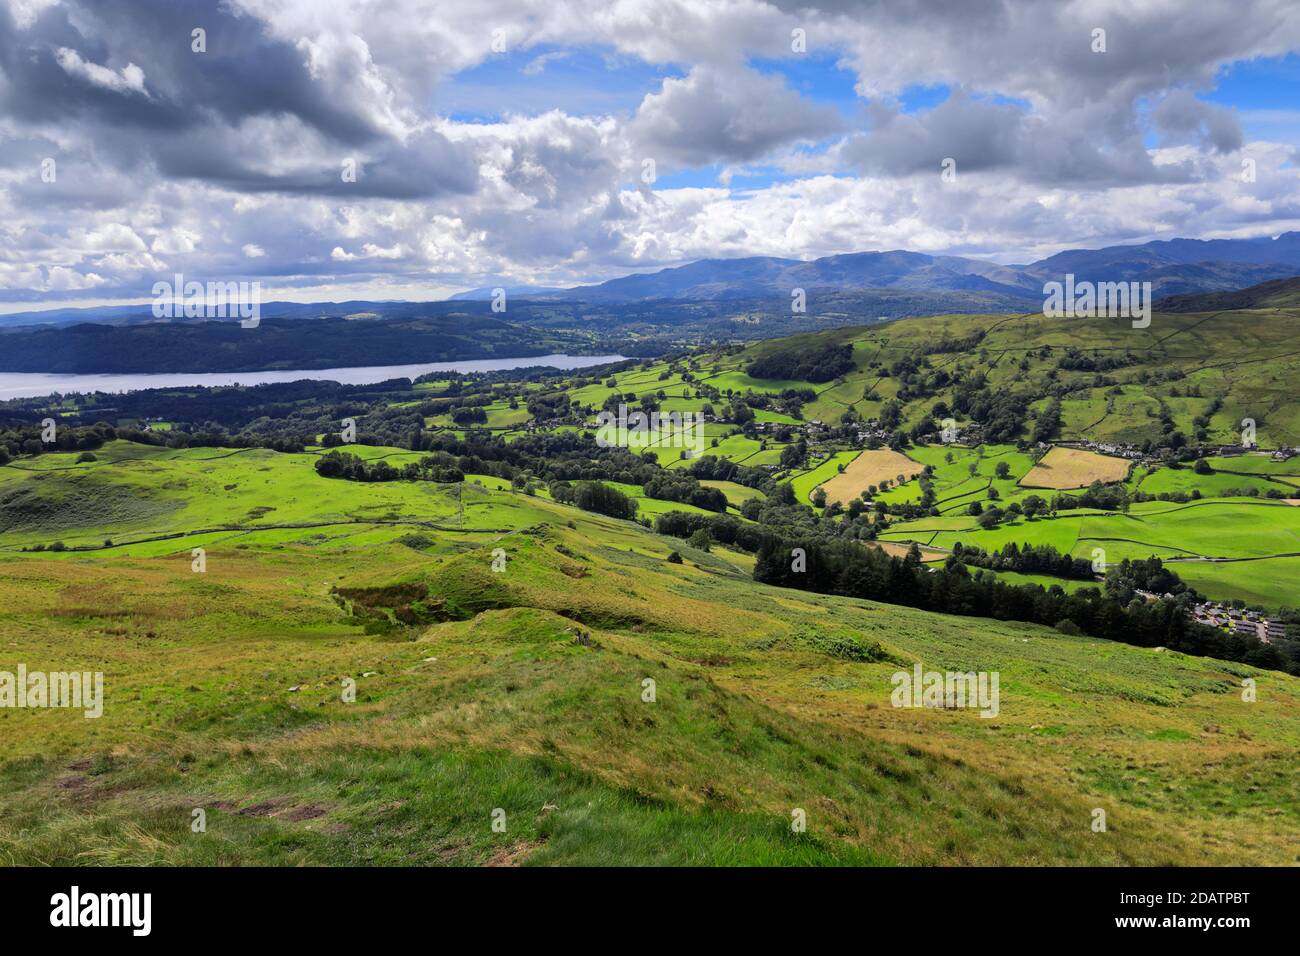 Summer view over Troutbeck village, Troutbeck valley, Kirkstone pass, Lake District National Park, Cumbria, England, UK Stock Photo